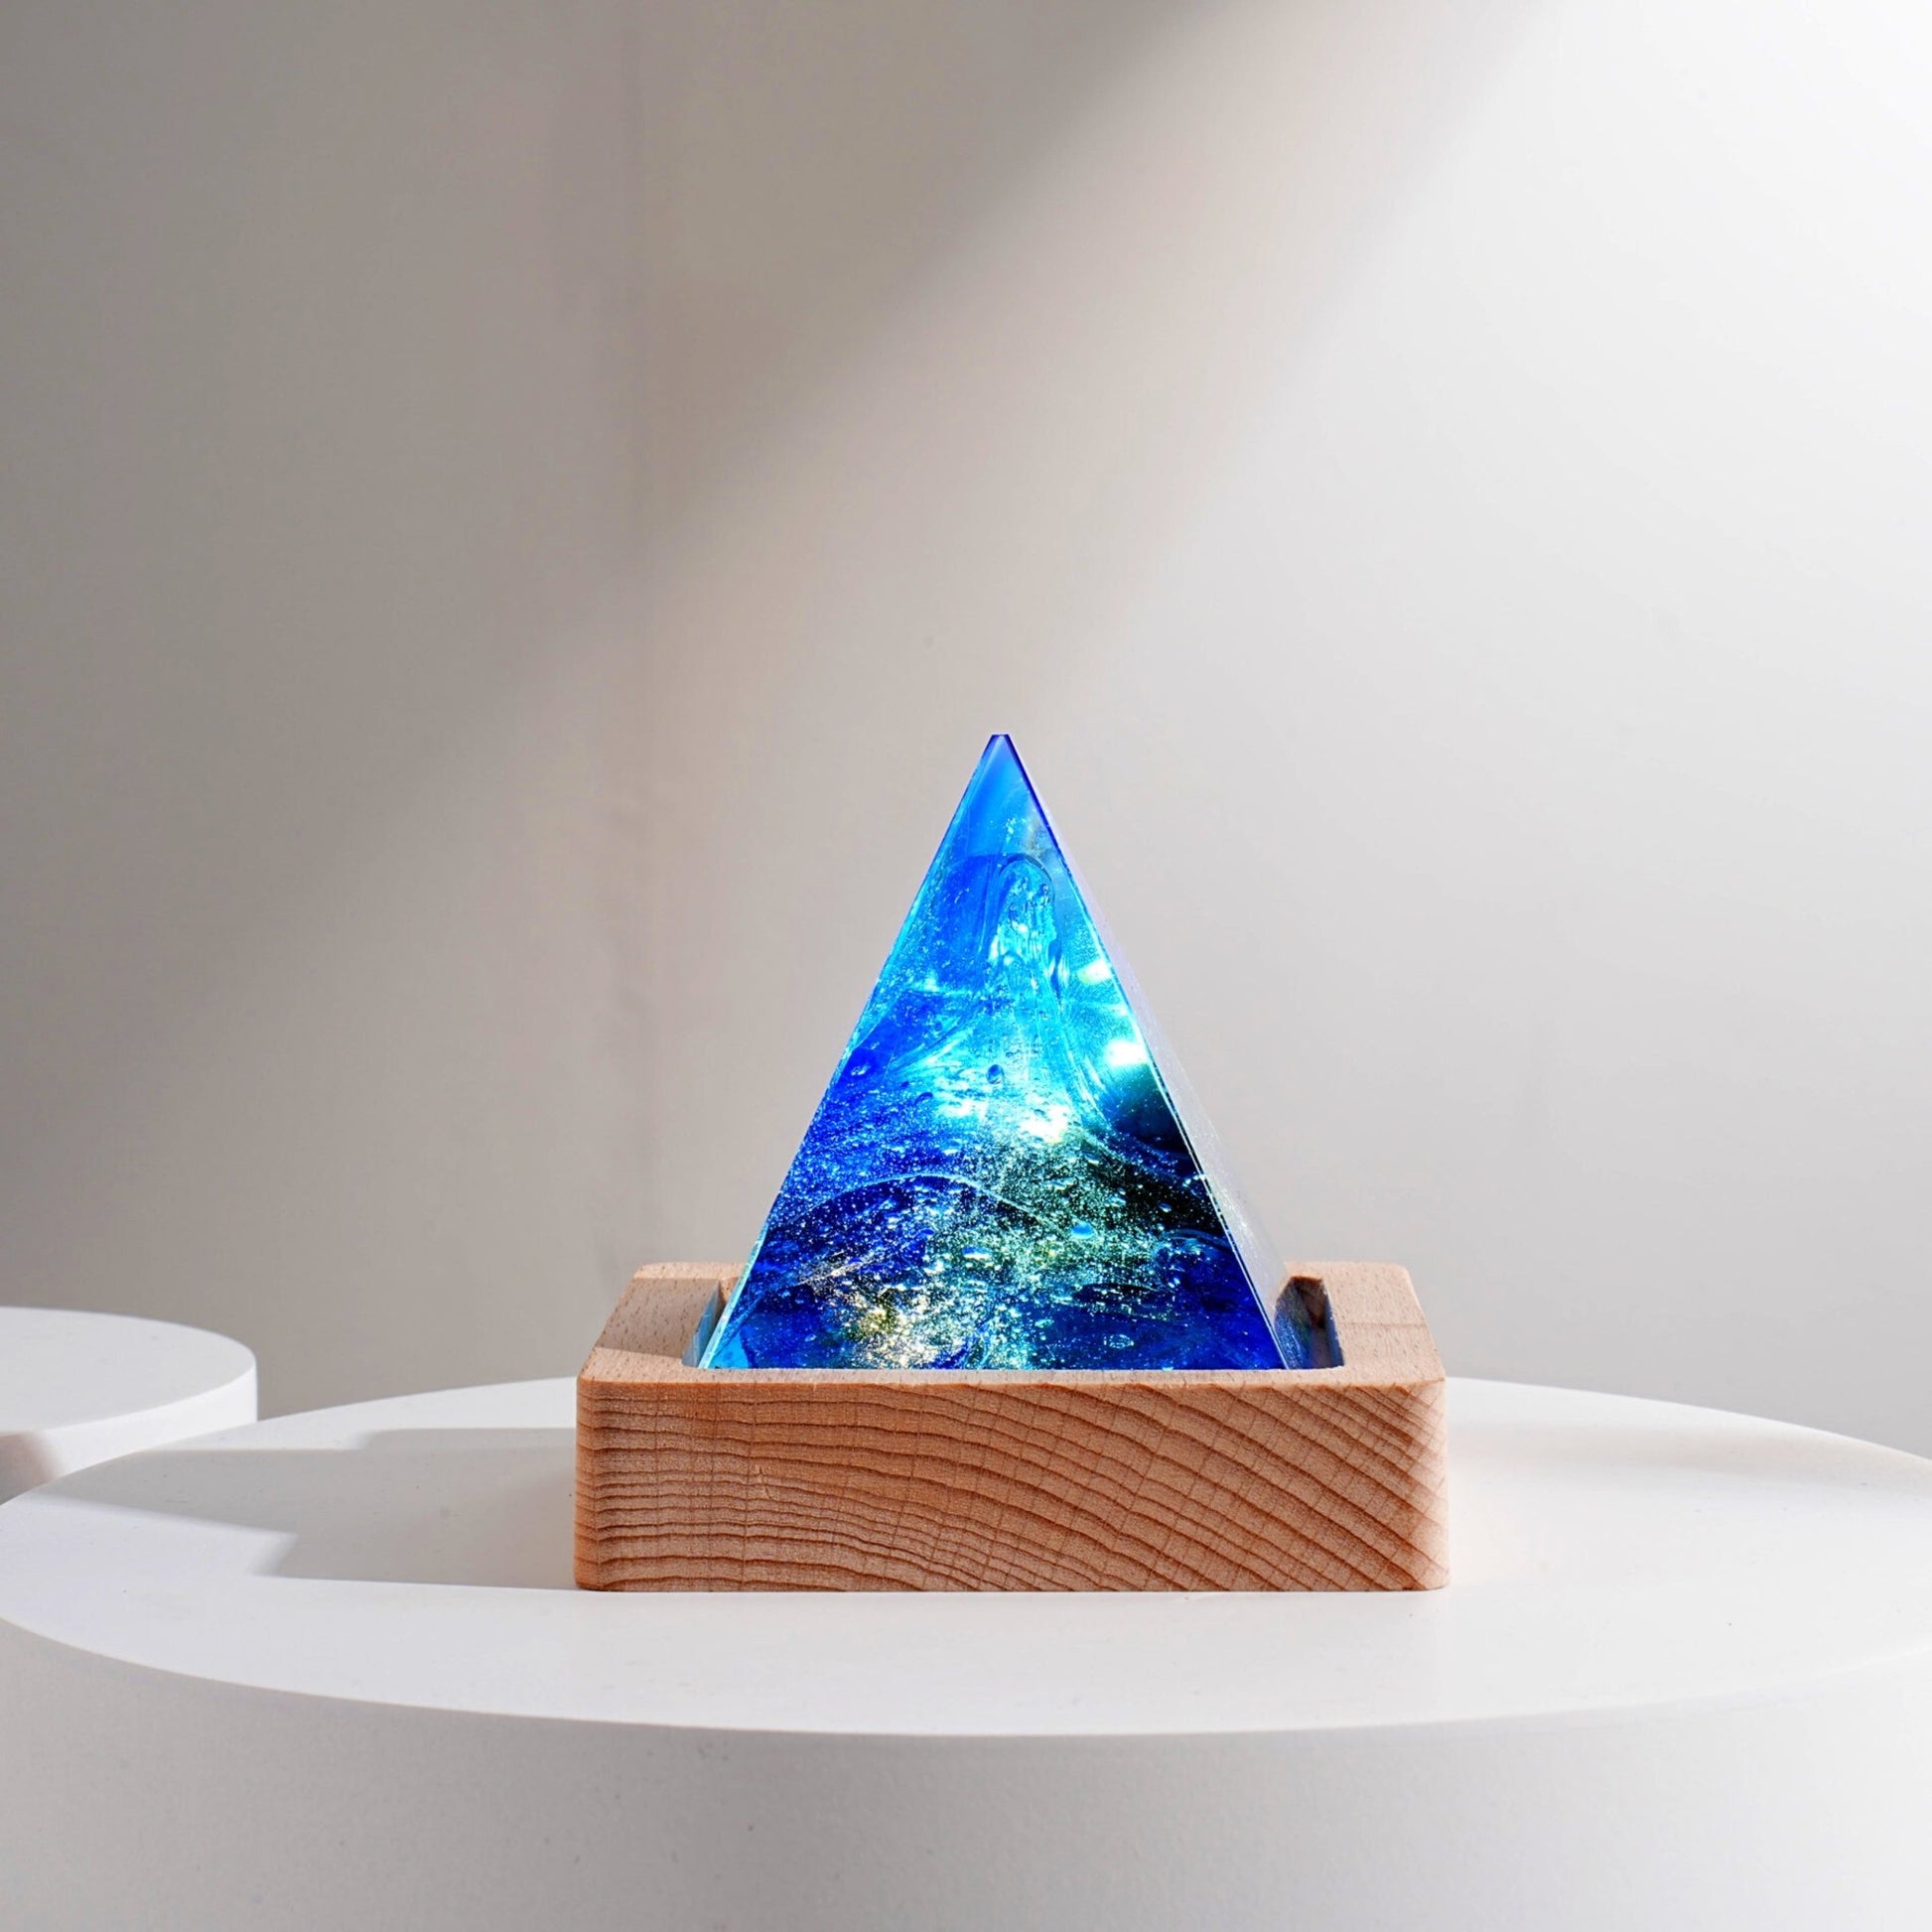 Starry Cosmic Pyramid - Space Mesmerise - Space Gifts | Lamps | Statues | Home Decor